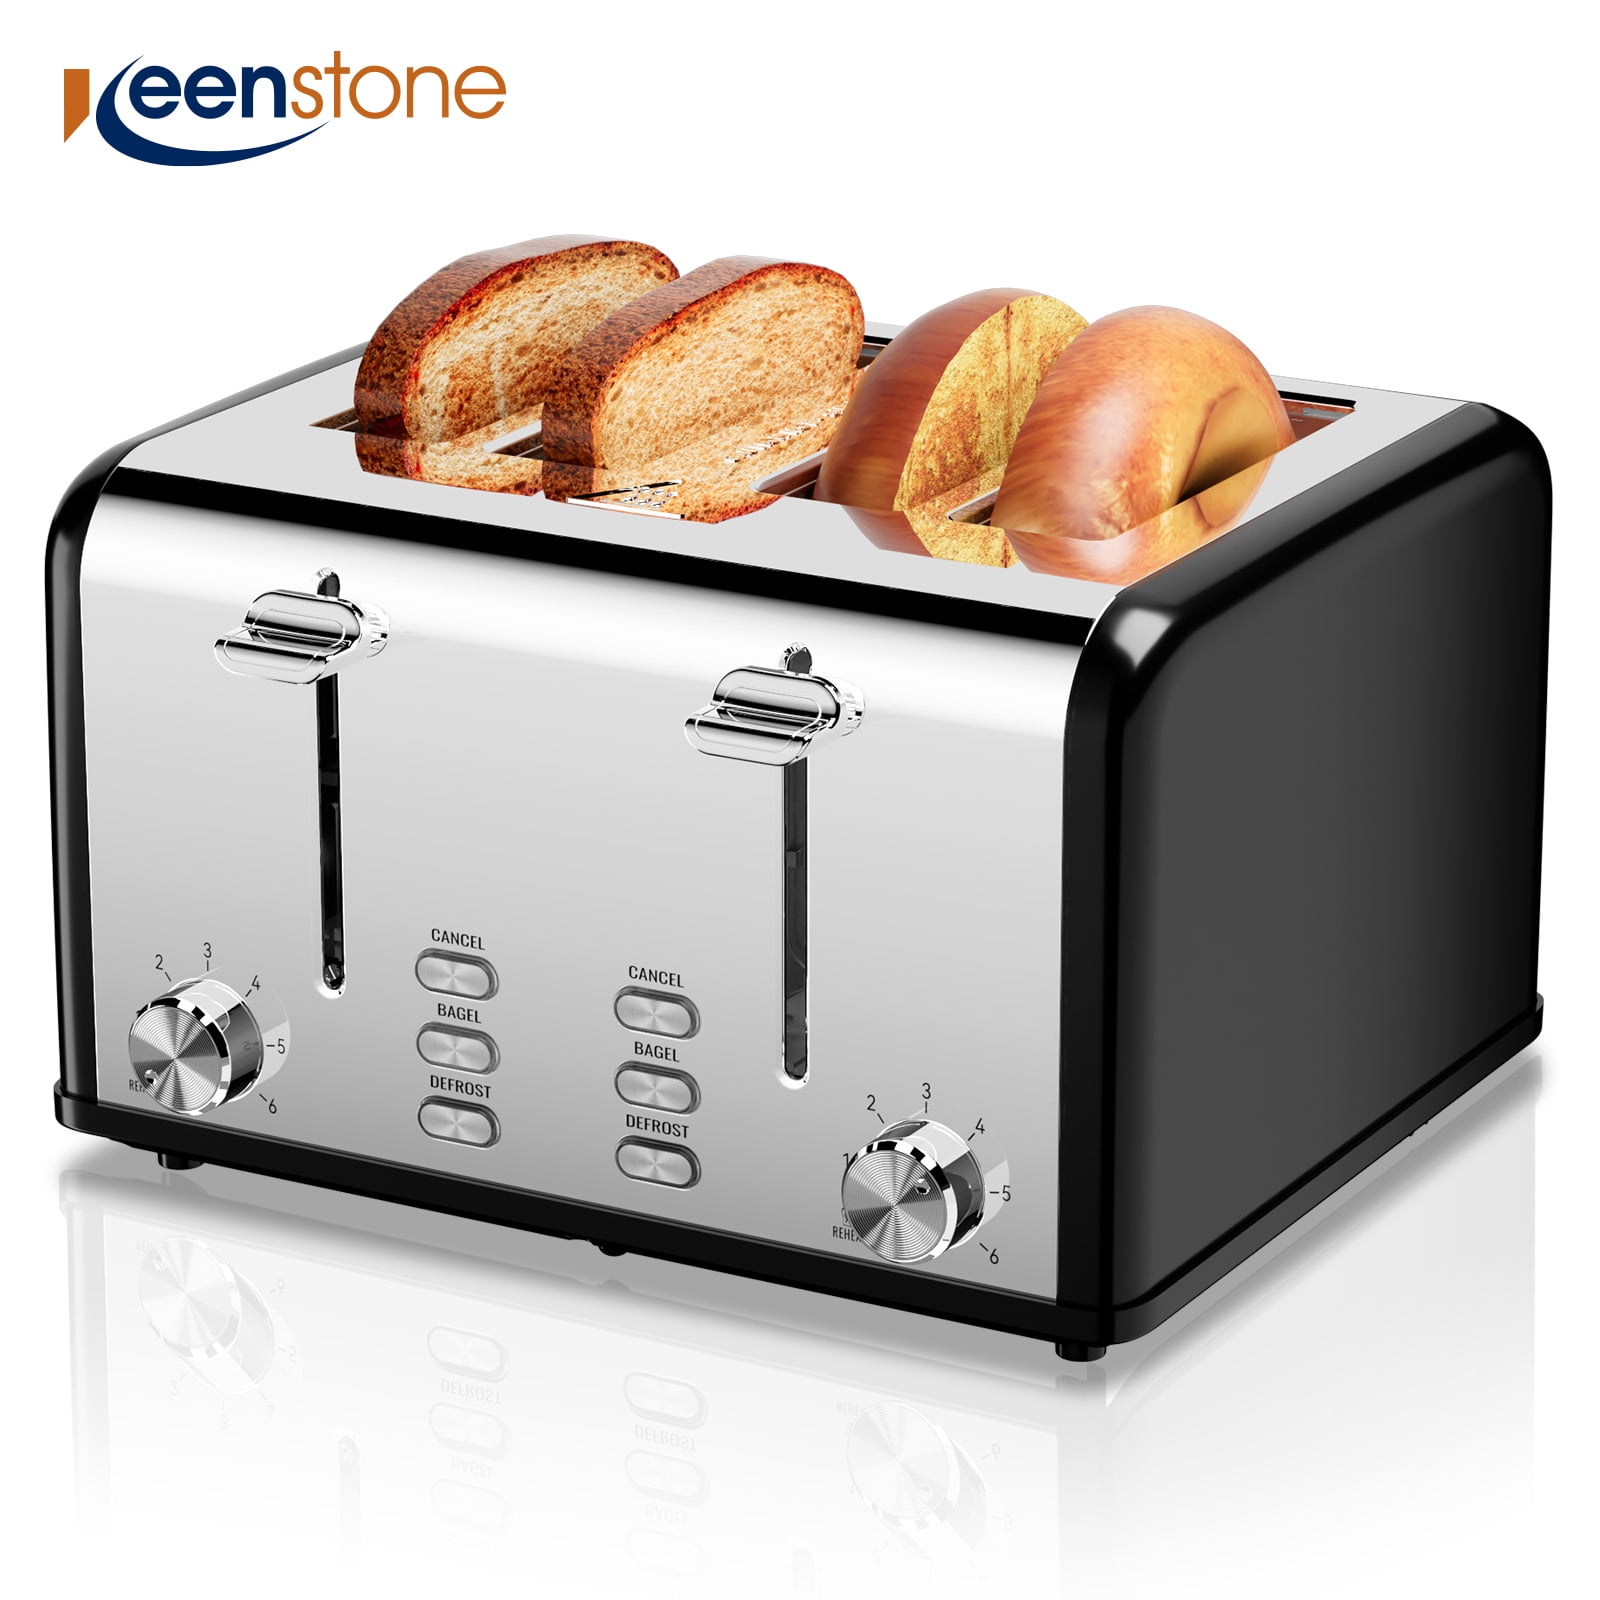  Bella - Pro Series 4-Slice Wide/Self-Centering-Slot Toaster -  Stainless Steel: Home & Kitchen